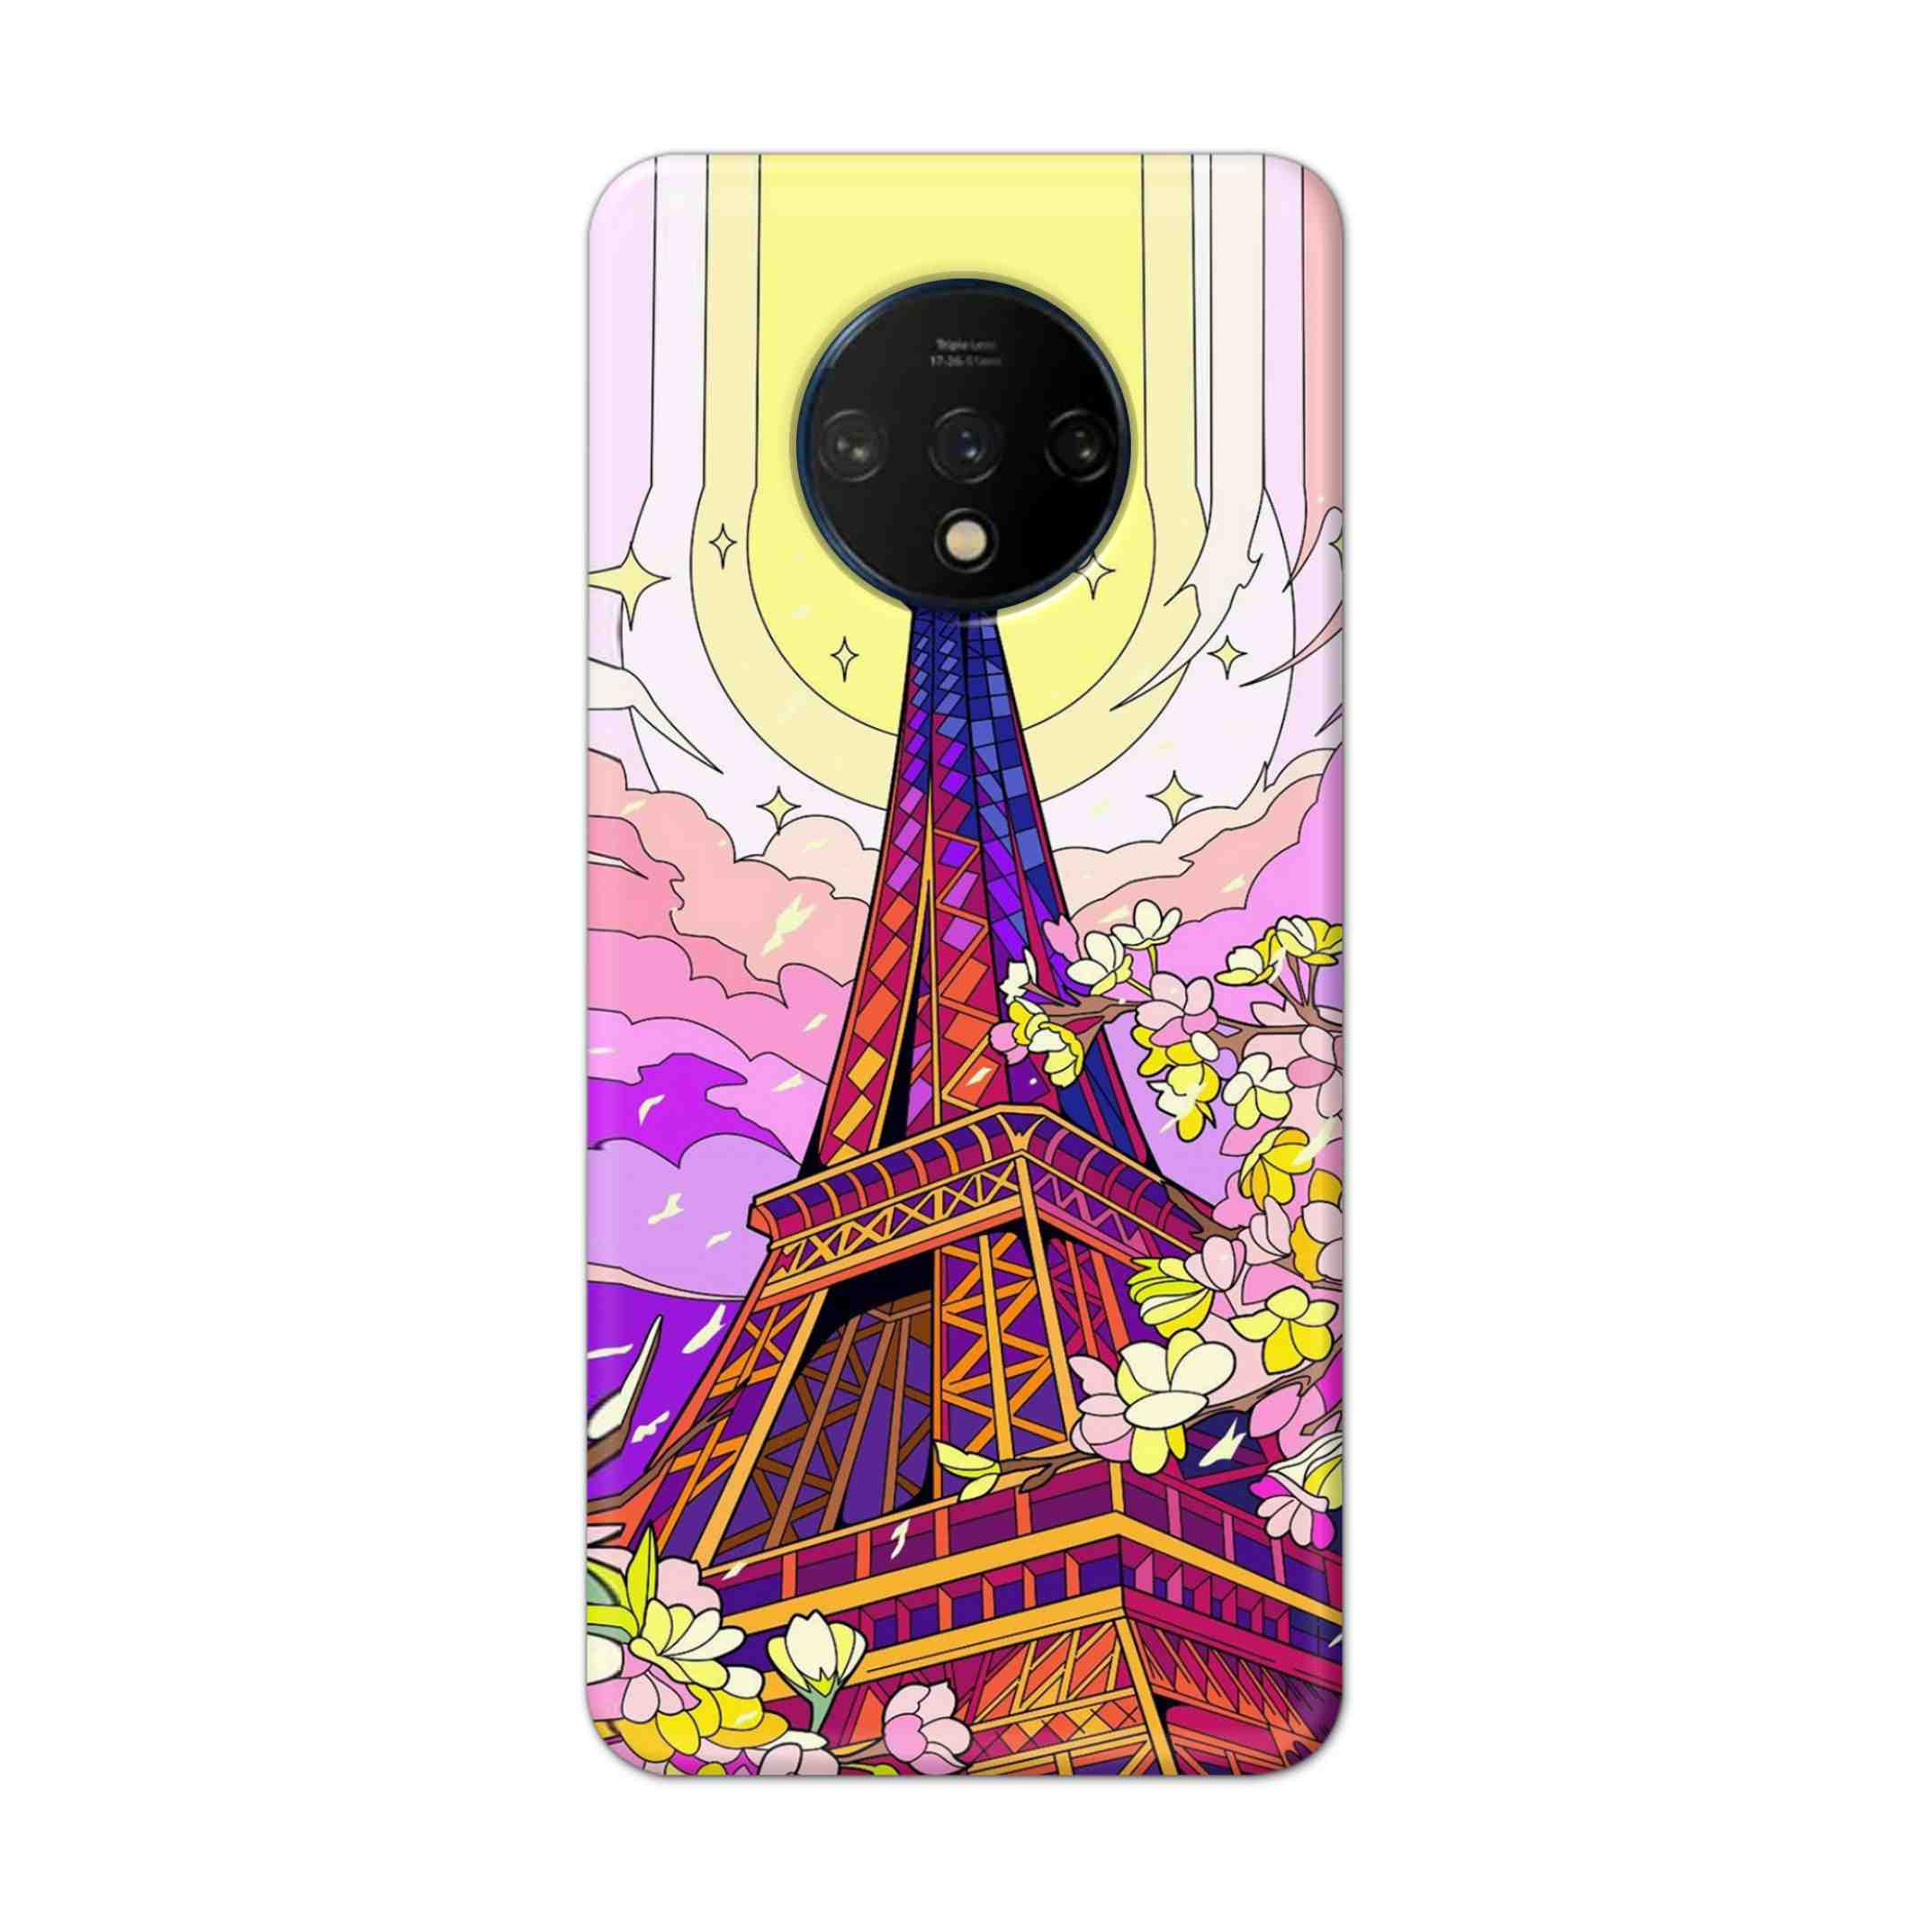 Buy Eiffel Tower Hard Back Mobile Phone Case Cover For OnePlus 7T Online